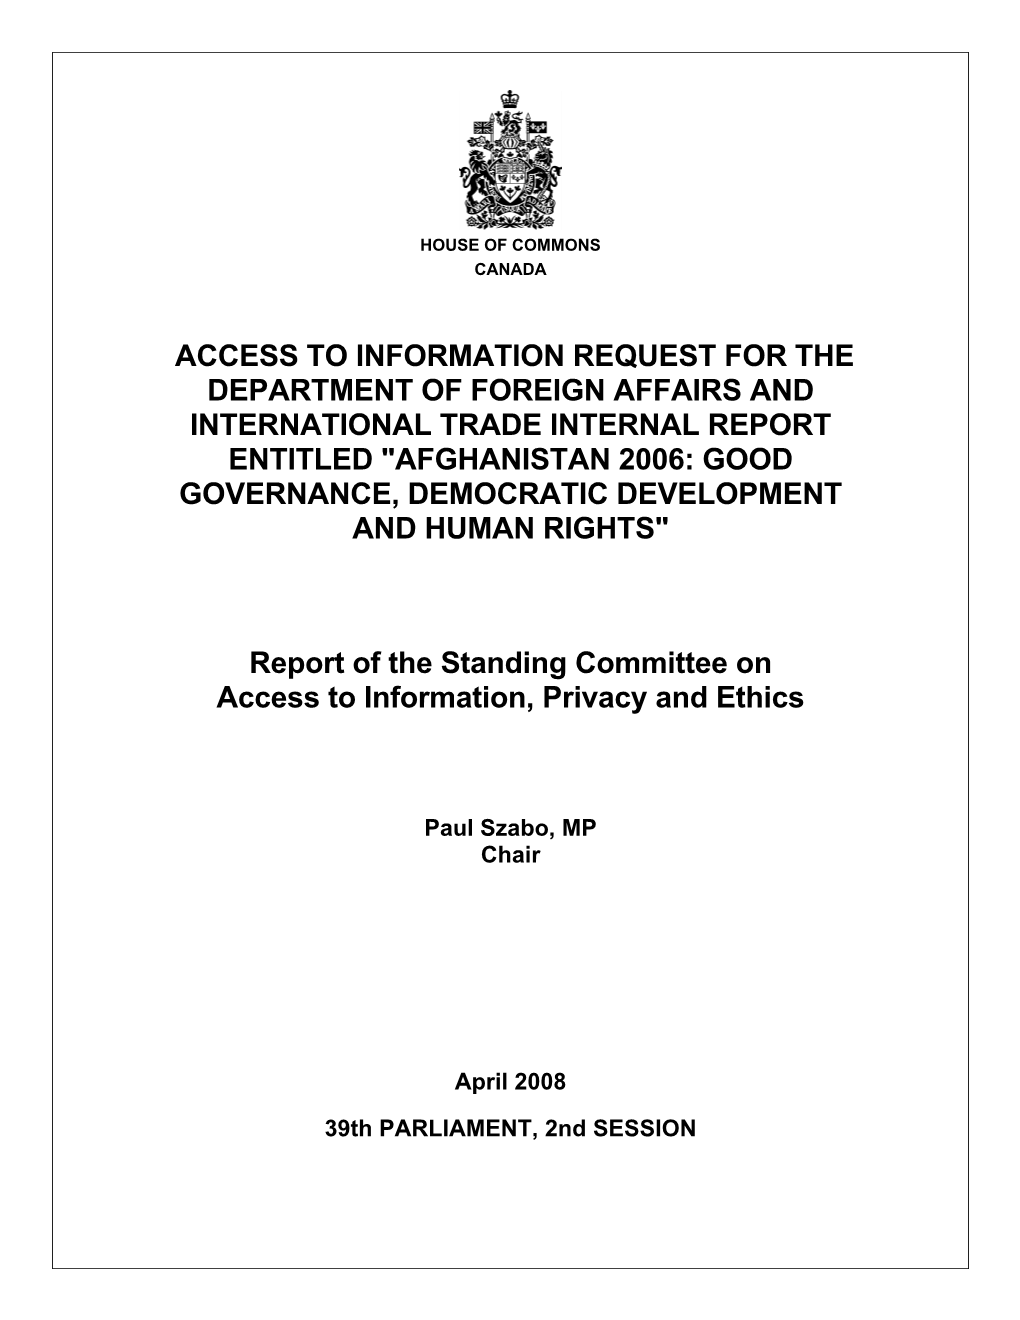 Access to Information Request for the Department of Foreign Affairs and International Trade Internal Report Entitled